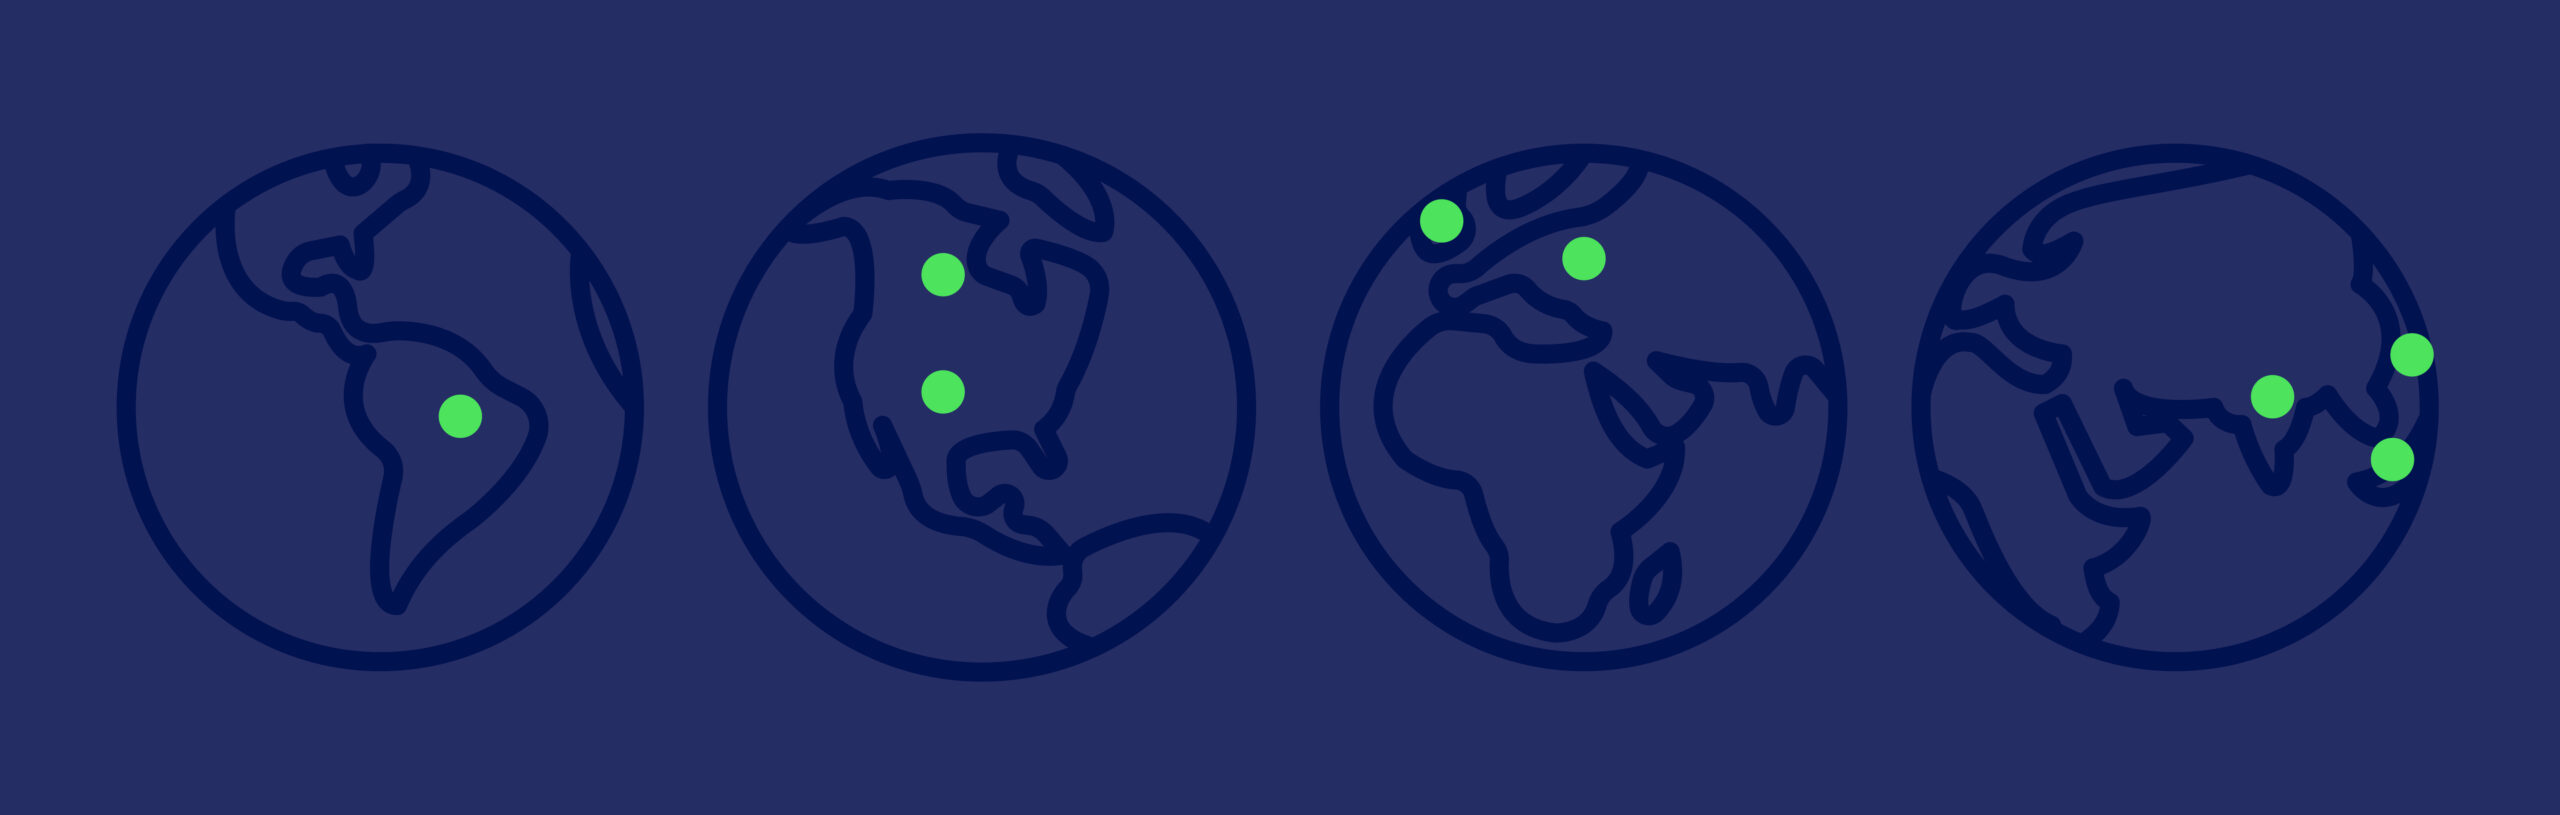 Globe icons with Brazil, Canada, Germany, India, Japan, Philippines, United Kingdom, and the United States highlighted.